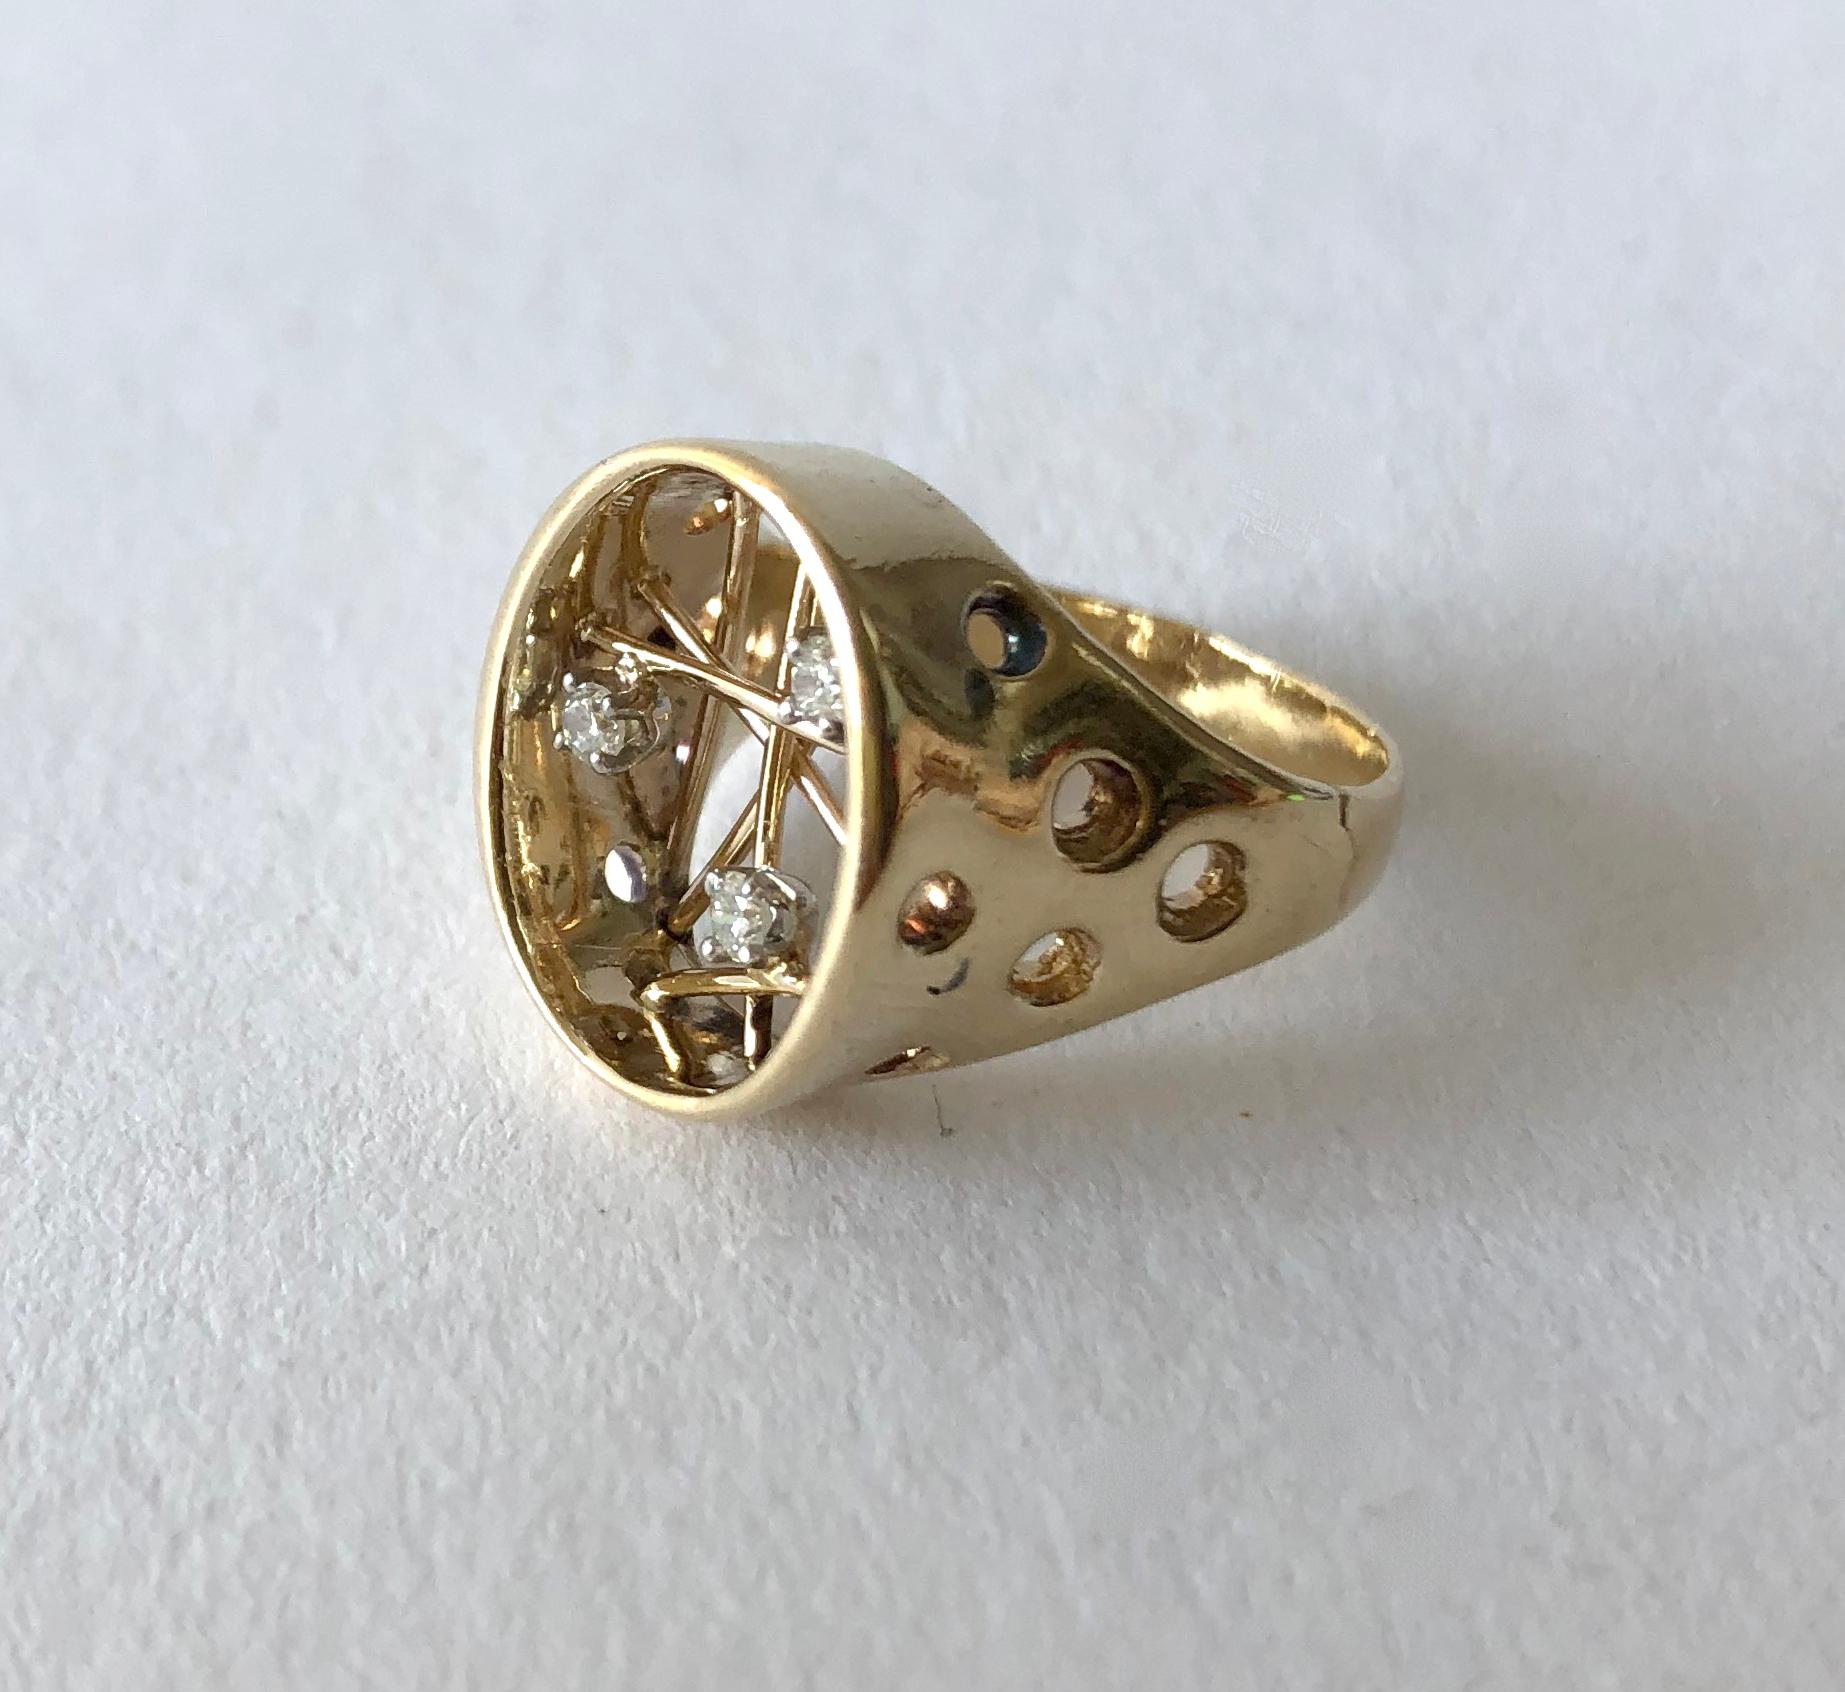 14K gold and diamond atomic sputnik ring, circa 1950s.  Ring is a finger size 5 and could be resized by a competent jeweler if need be.  An interesting alternative to a modern day engagement ring or otherwise. In very good vintage condition. 5.8